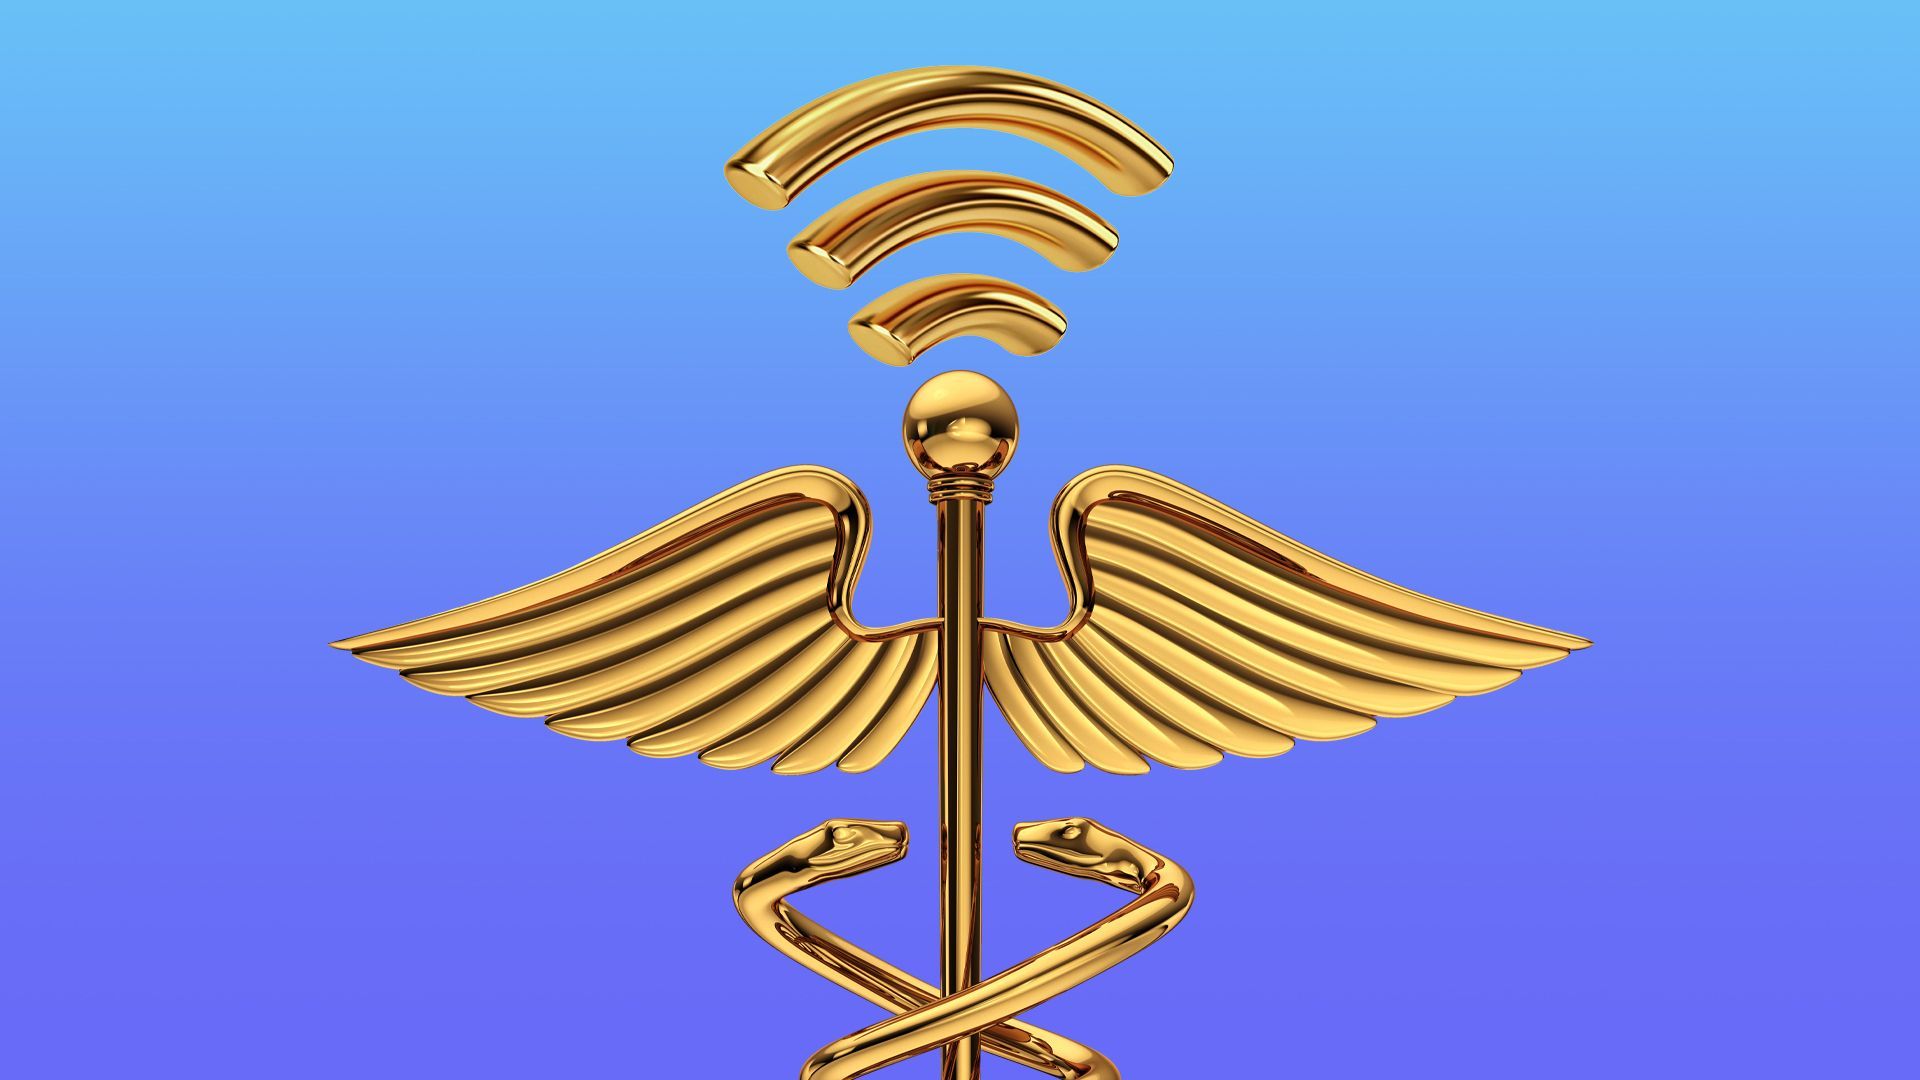 Illustration of a golden caduceus with wifi extending from the top of it